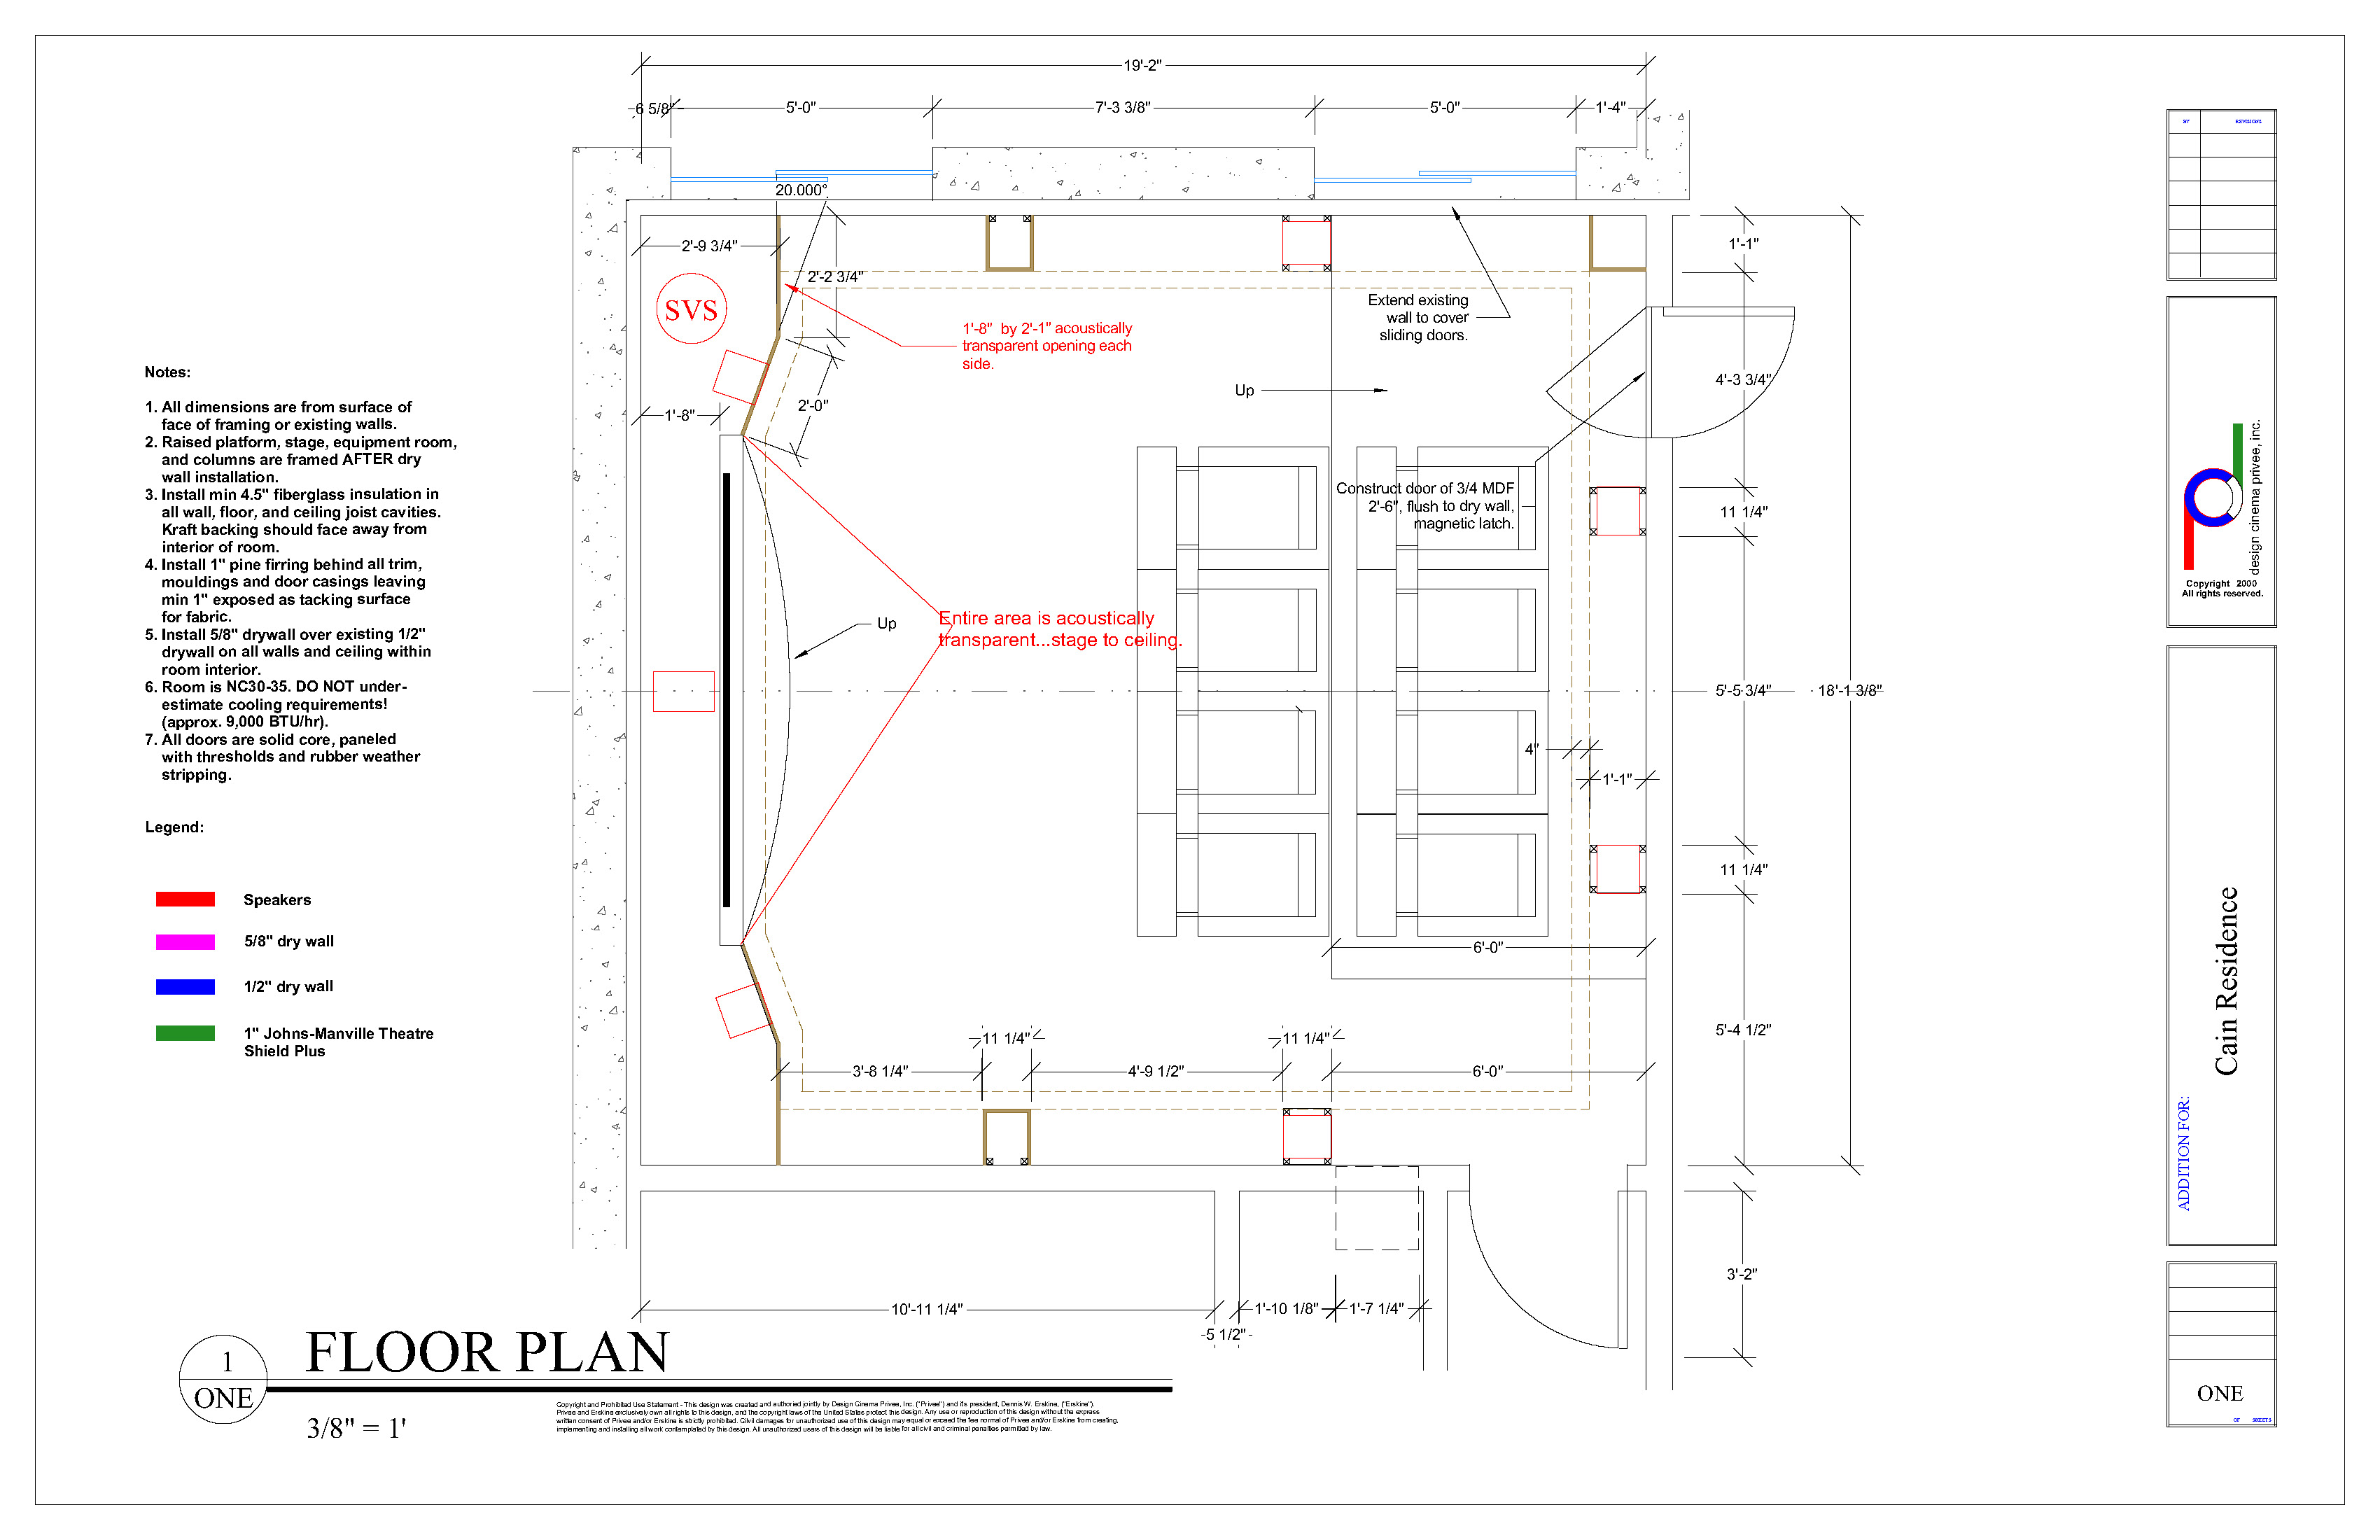 Cain's Theater Plan View